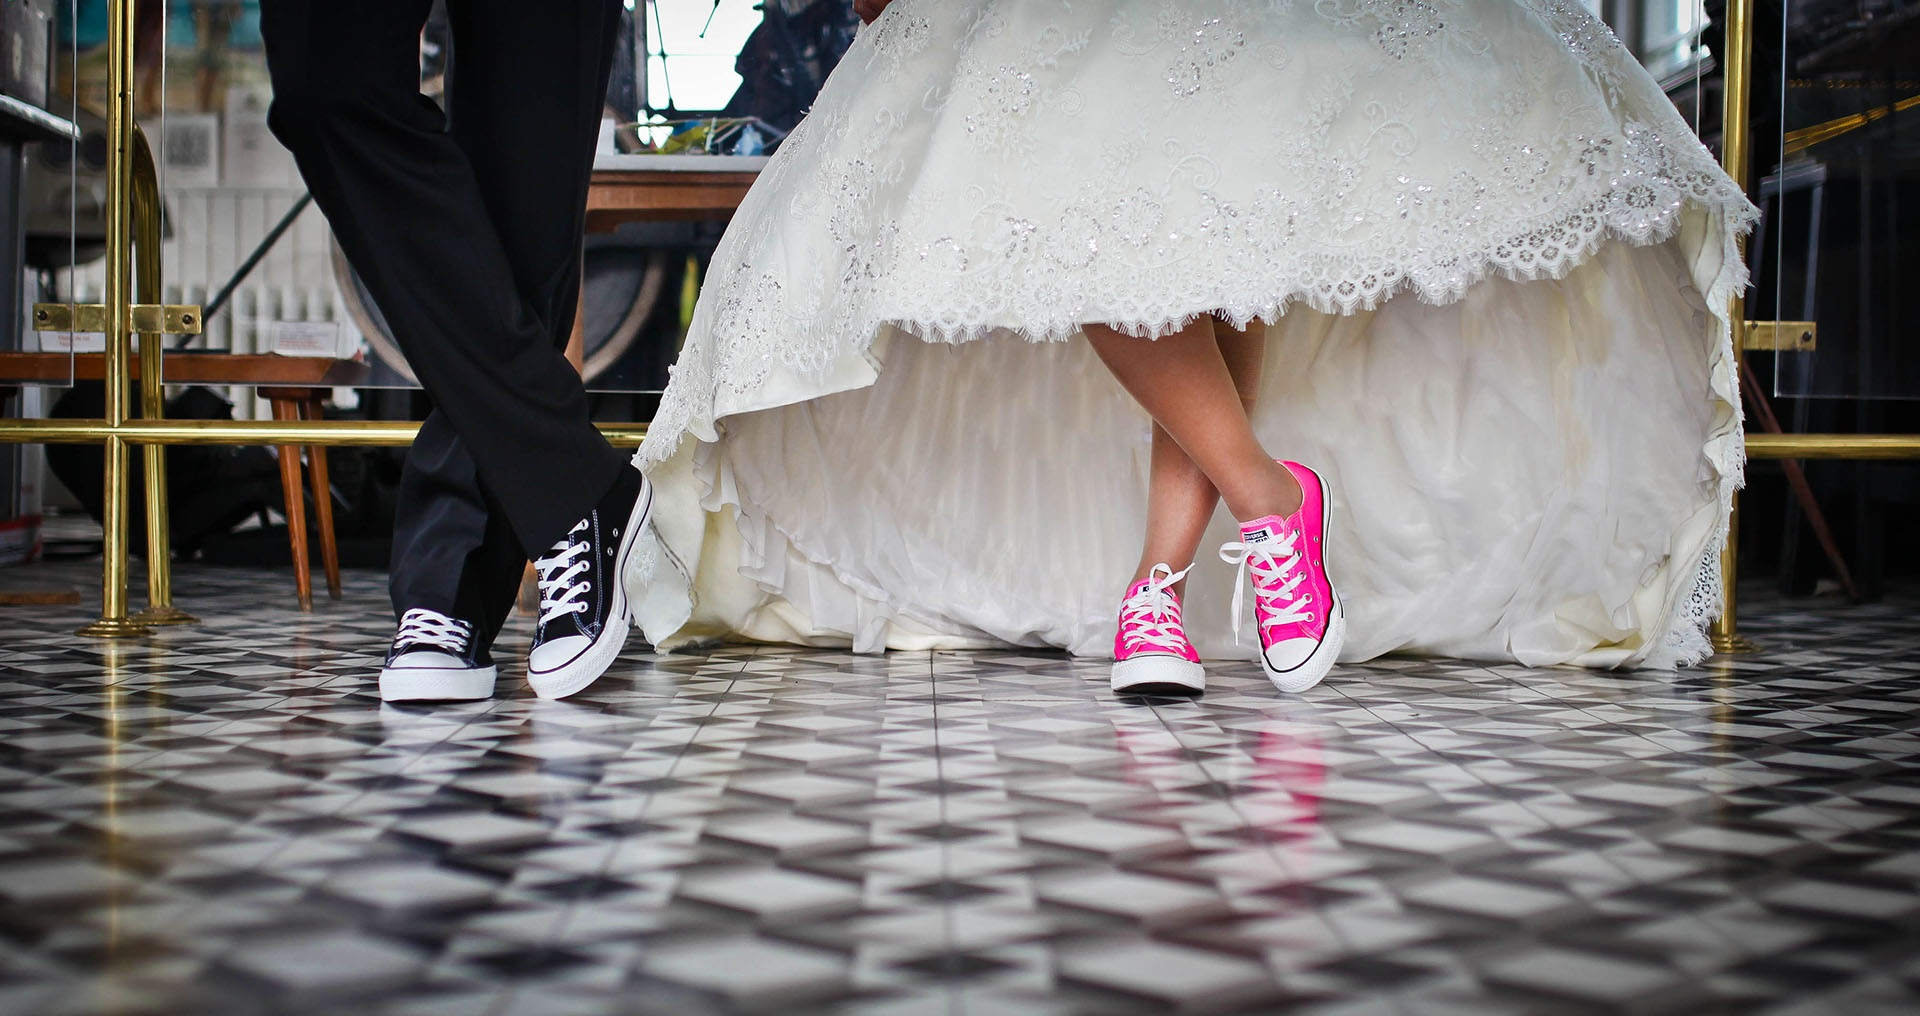 5 Wonderful Ways to Wow Your Wedding Guests